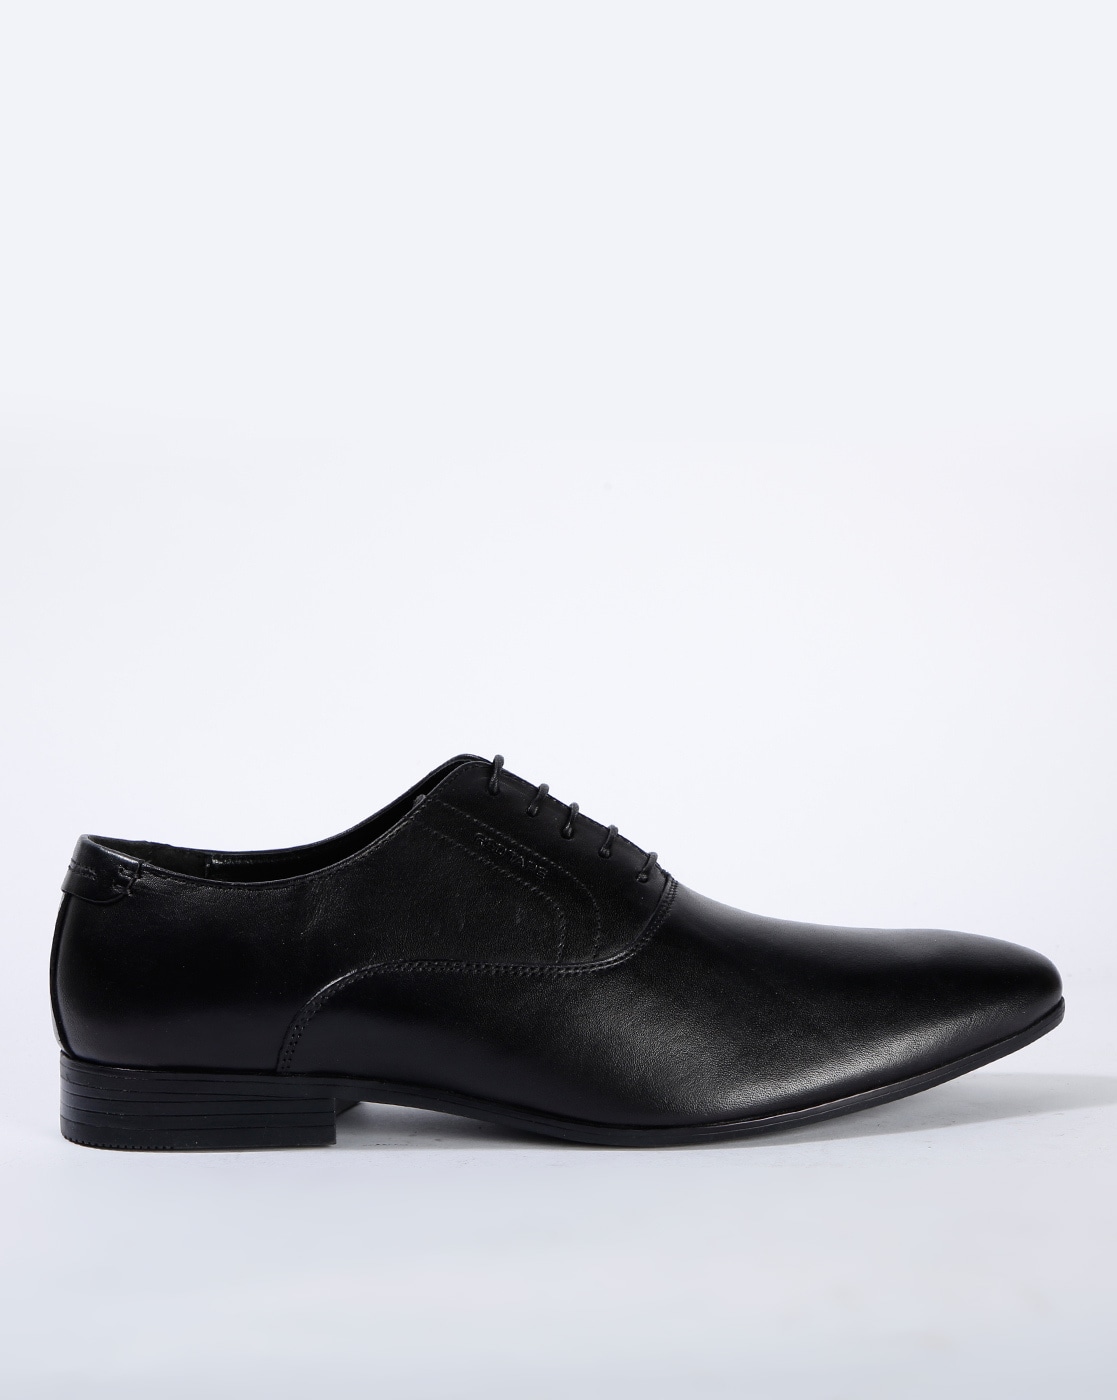 red tape black oxford shoes